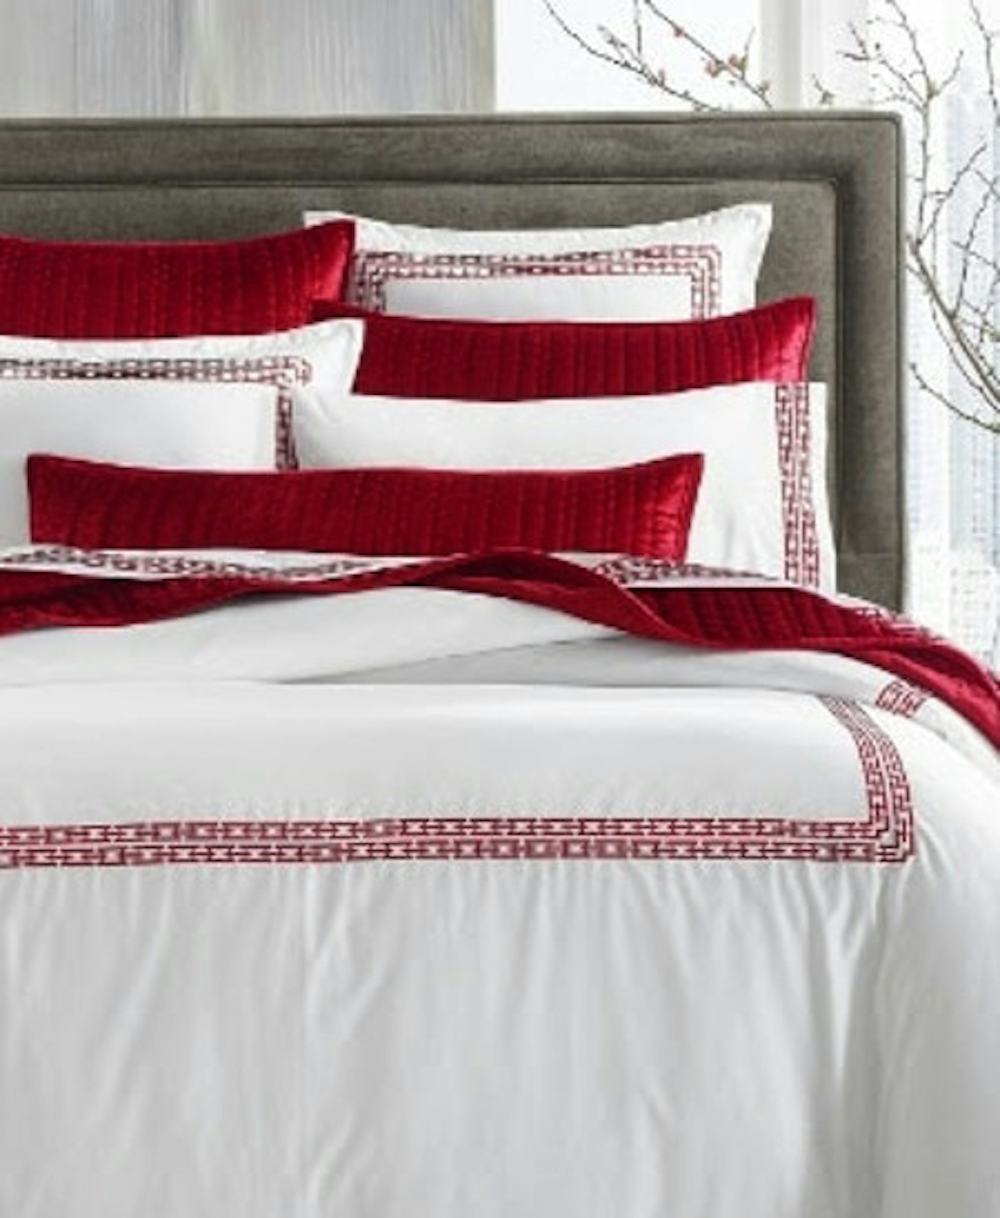 60% off Bedding from Hotel Collection and More